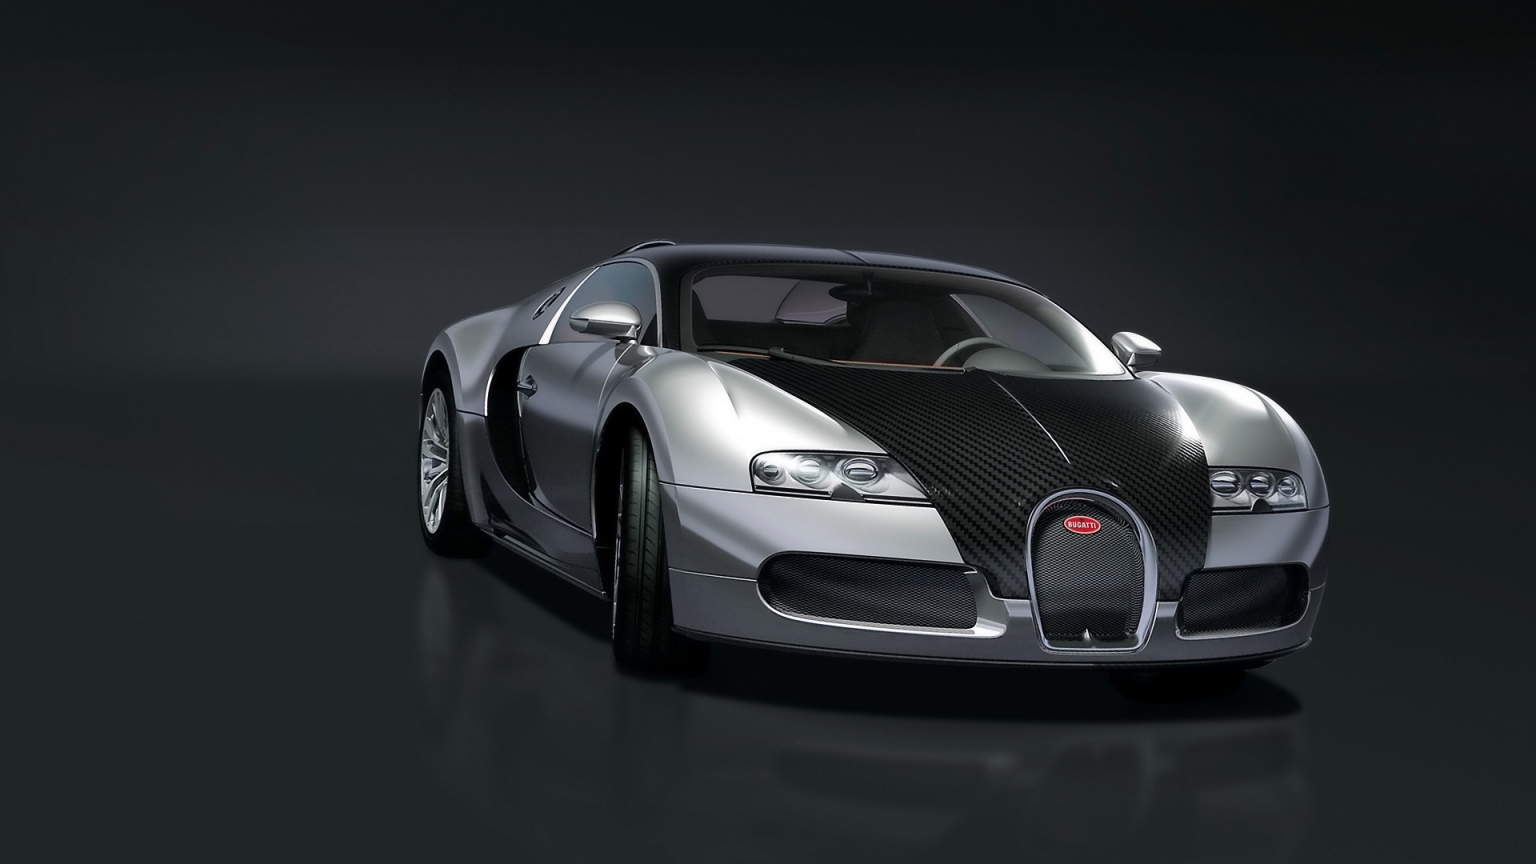 Bugatti EB 16.4 Veyron Pur Sang 2008 - Front Angle for 1536 x 864 HDTV resolution